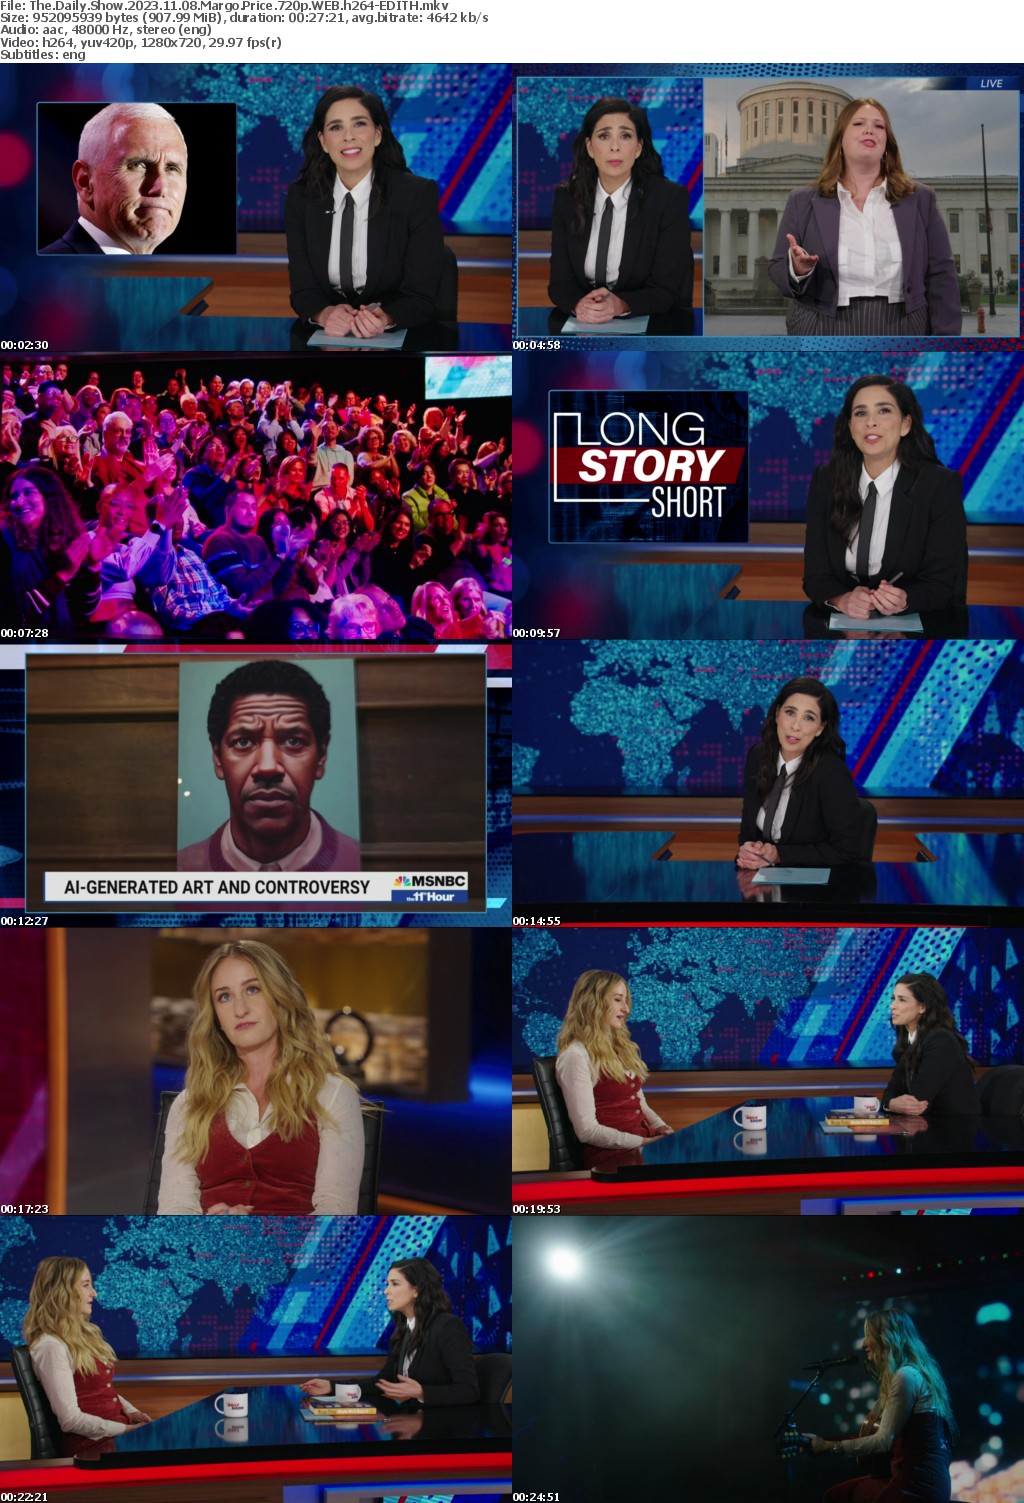 The Daily Show 2023 11 08 Margo Price 720p WEB h264-EDITH